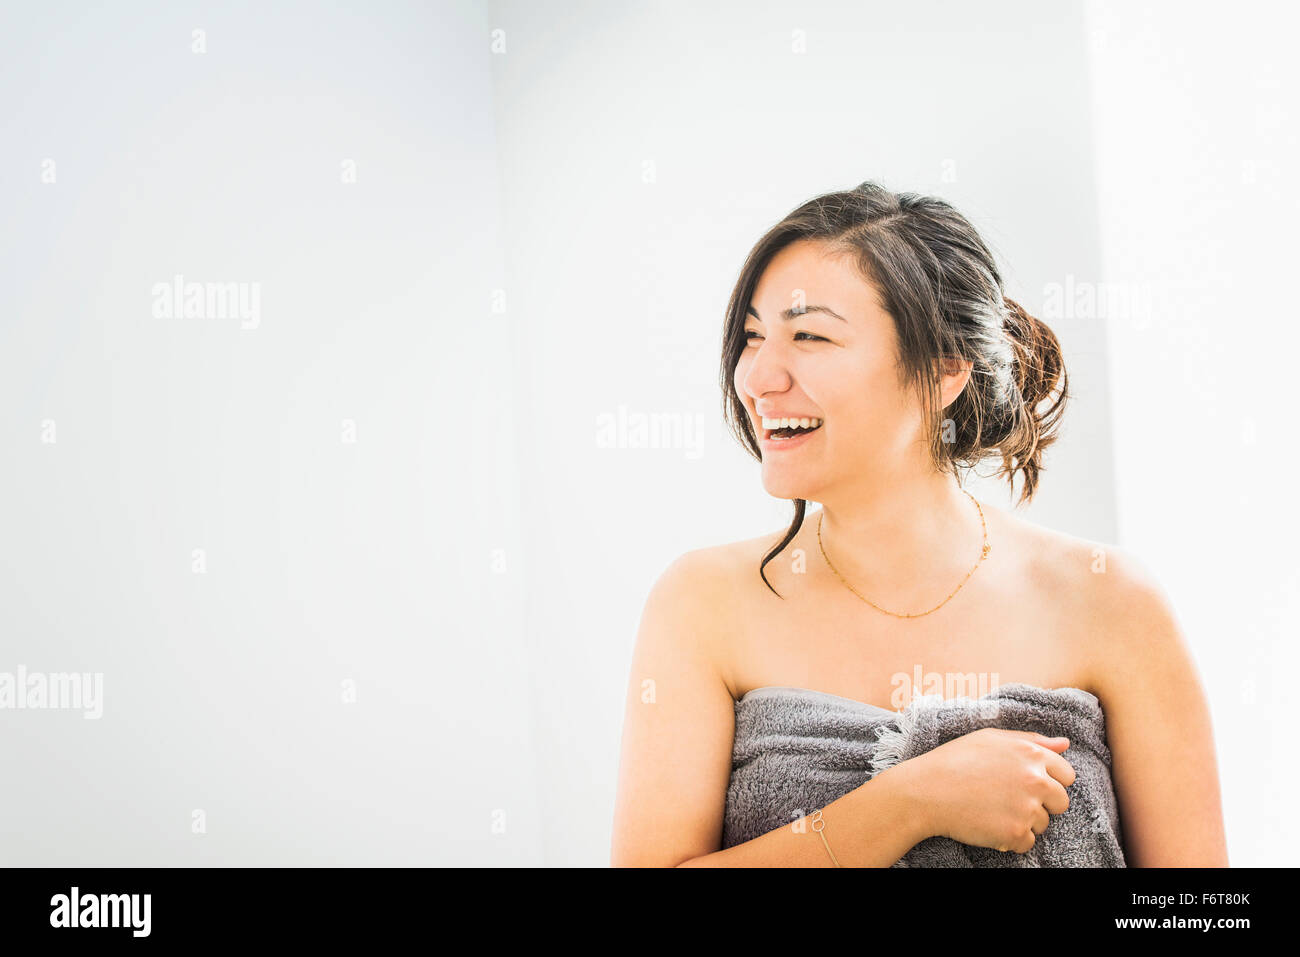 Laughing woman wrapped in towel Stock Photo